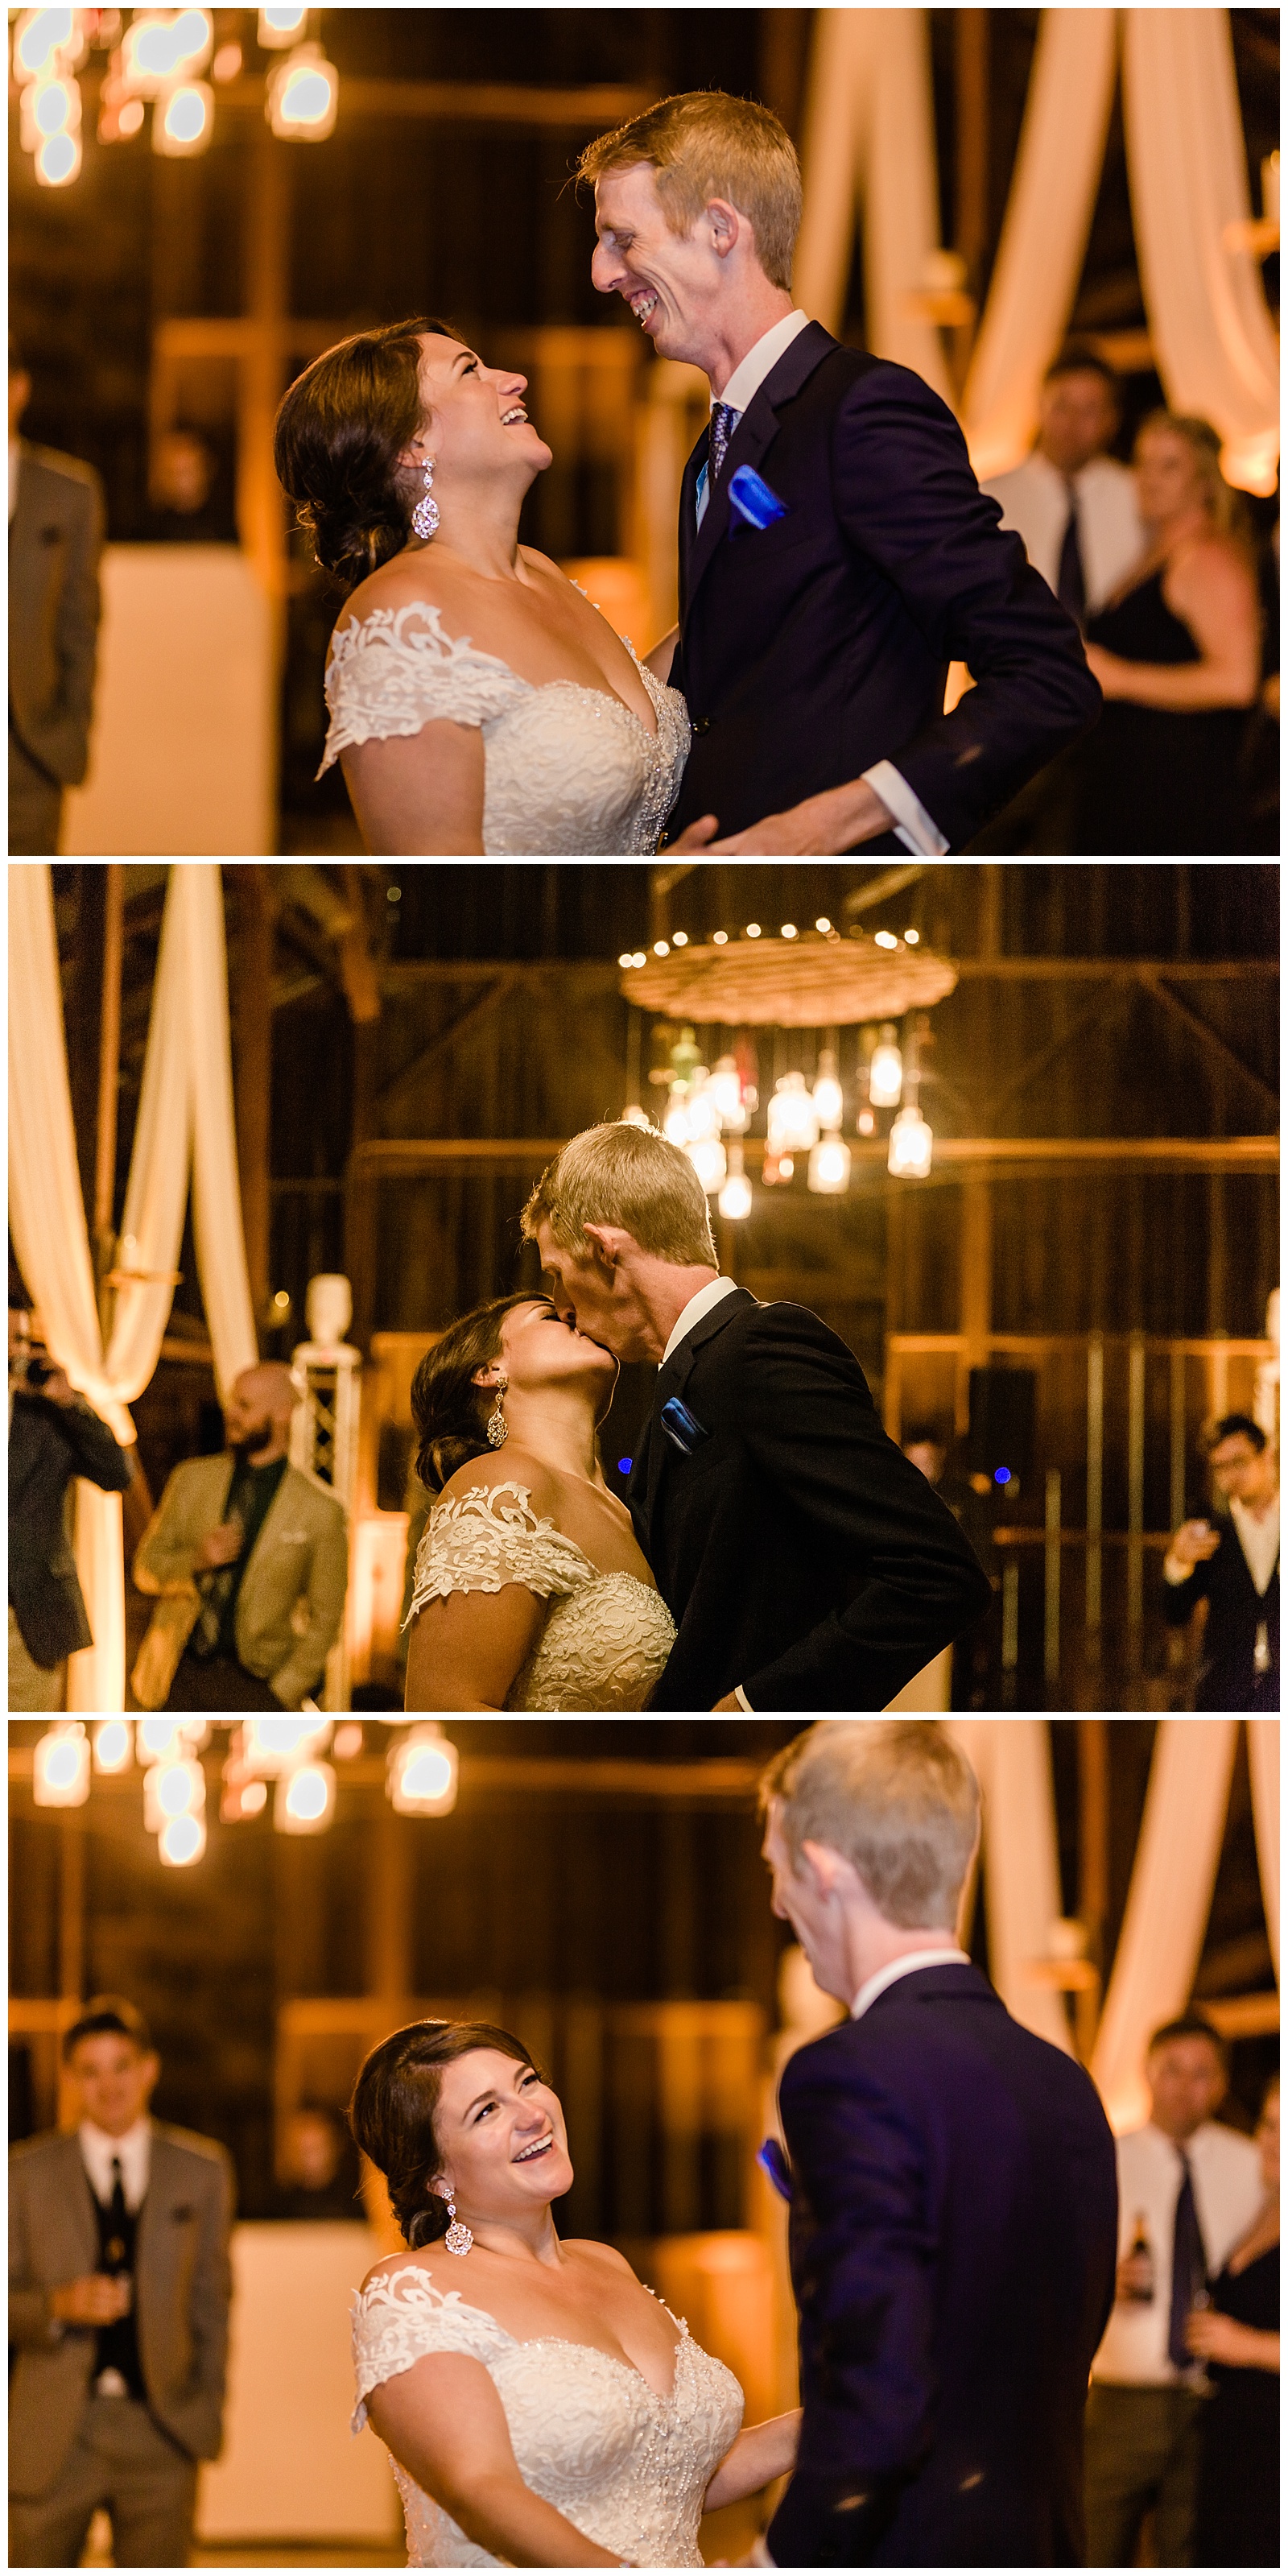 candid moments of the bride and groom during their first dance at their wedding reception